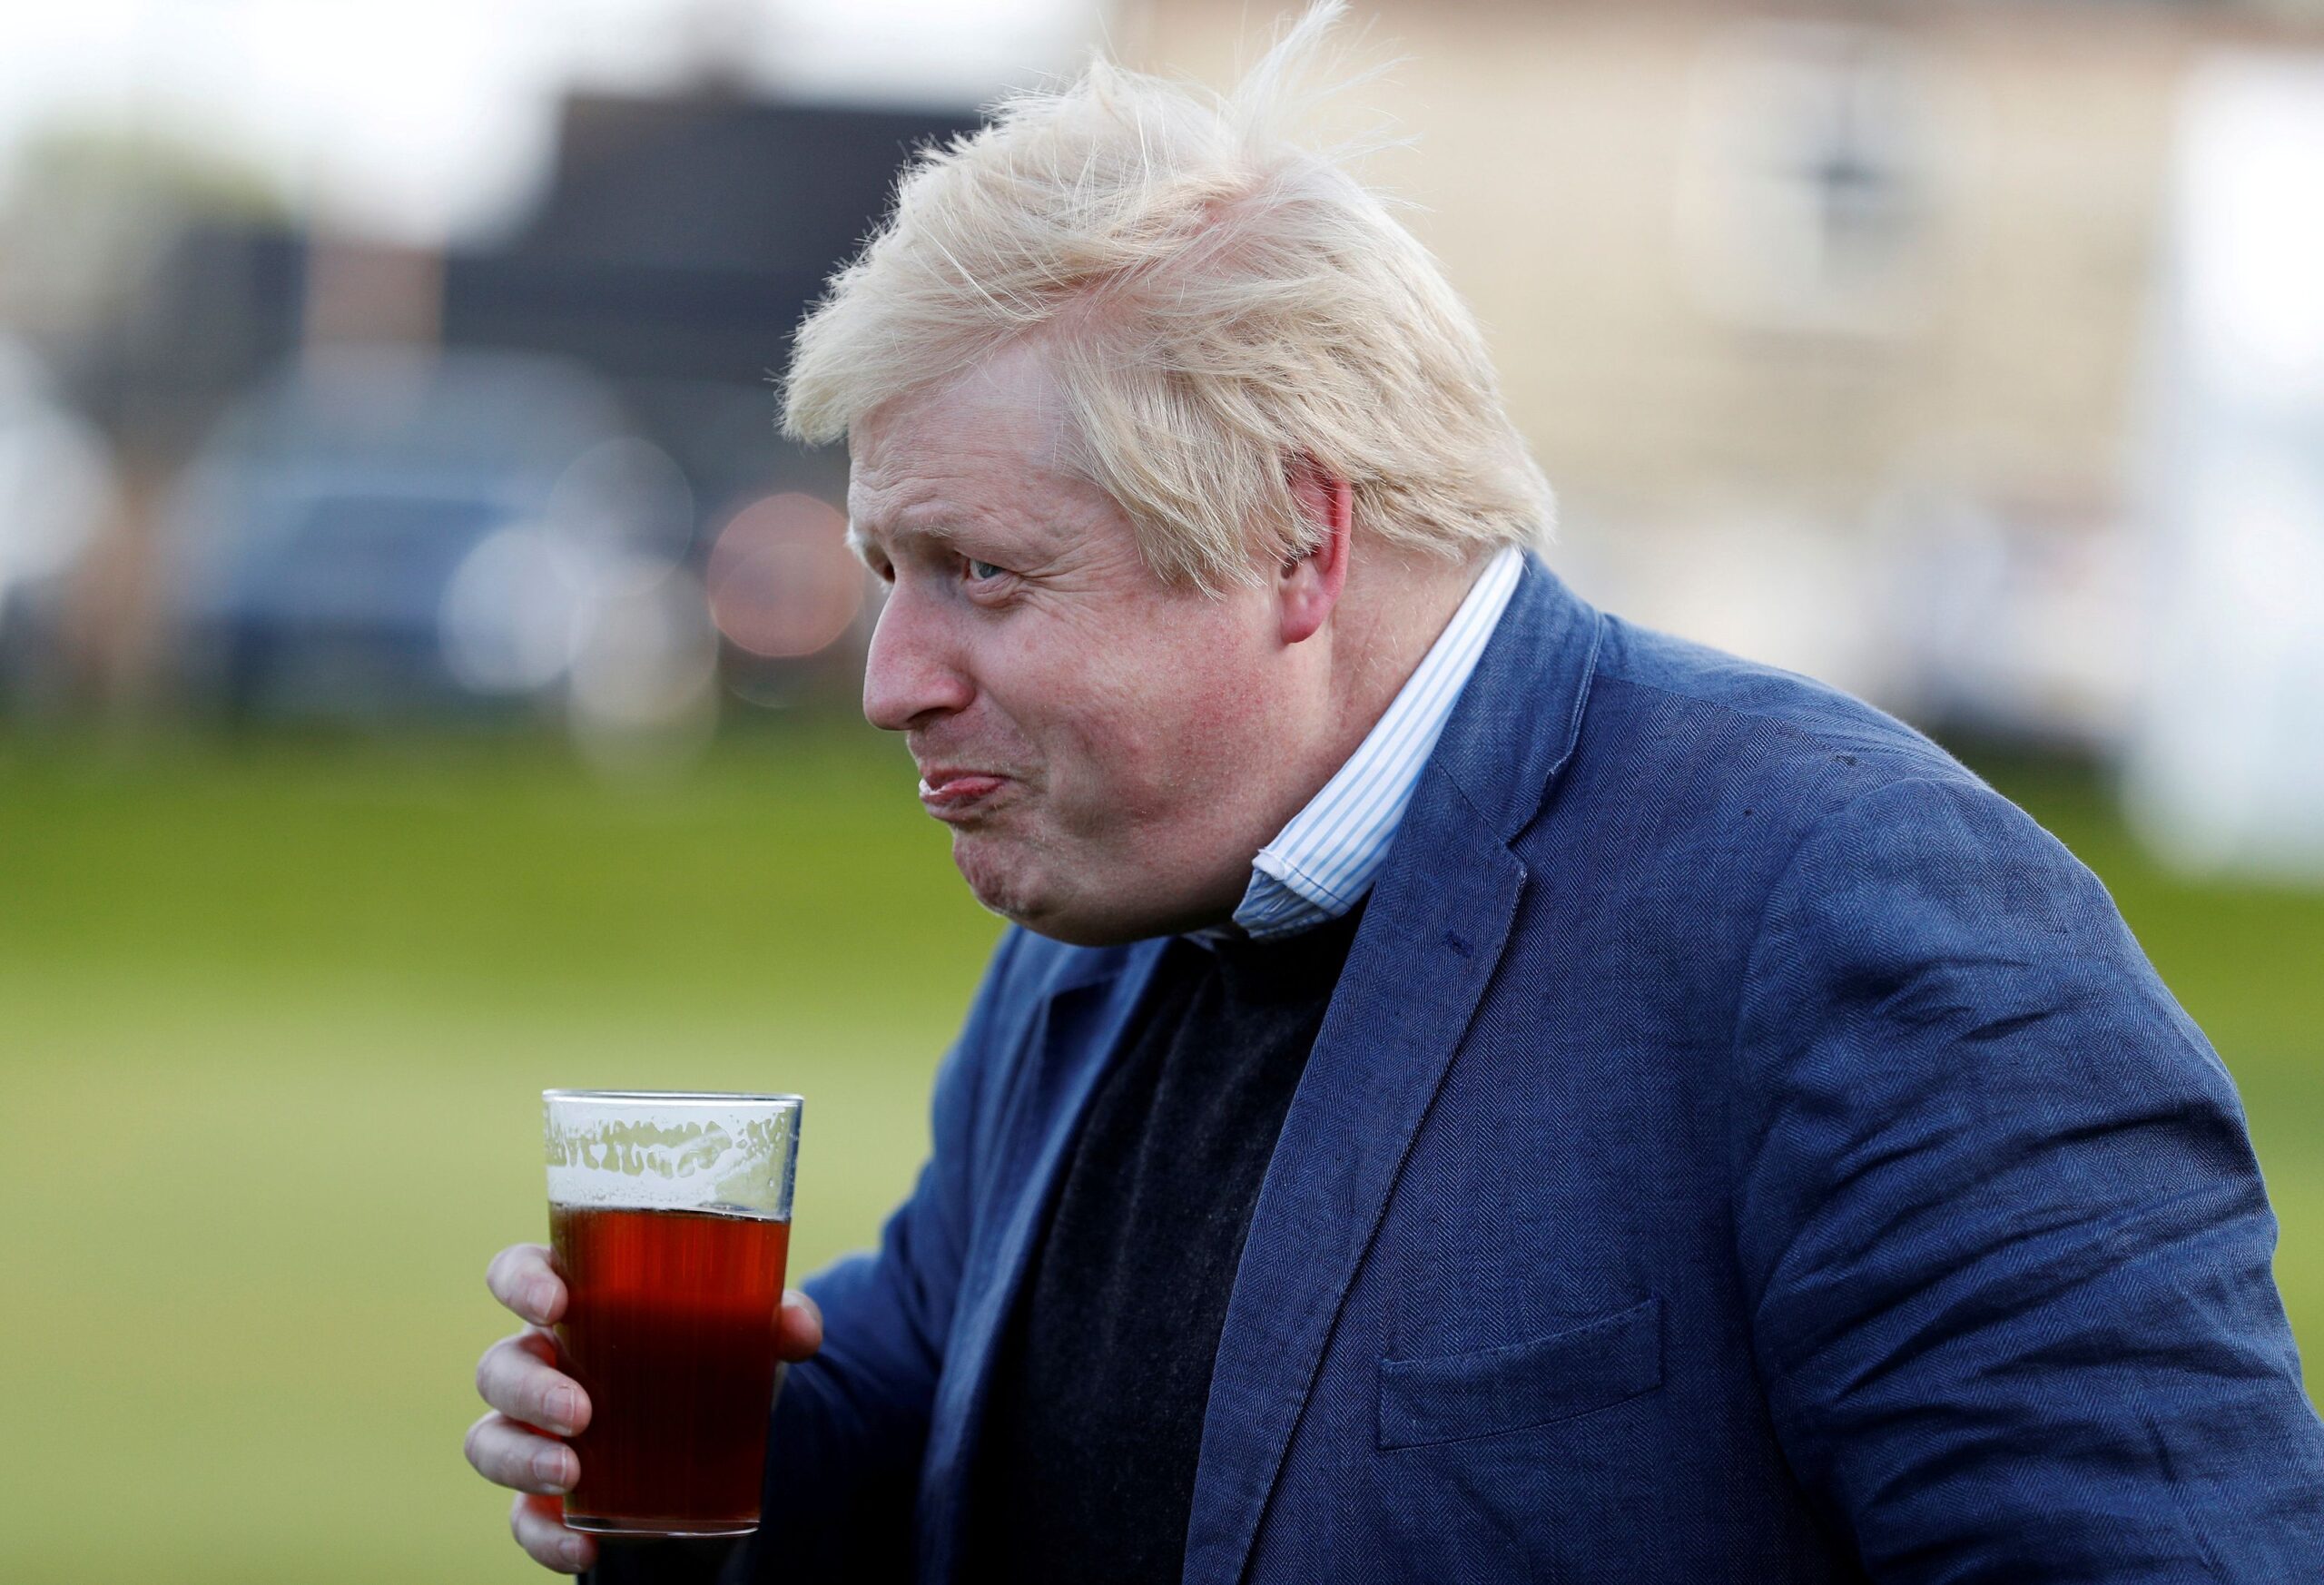 FILE PHOTO: Former London Mayor Boris Johnson drinks from a pint of beer after arriving at a Vote Leave event in Chester le Street, northern Britain May 30, 2016. REUTERS/Phil Noble/File Photo